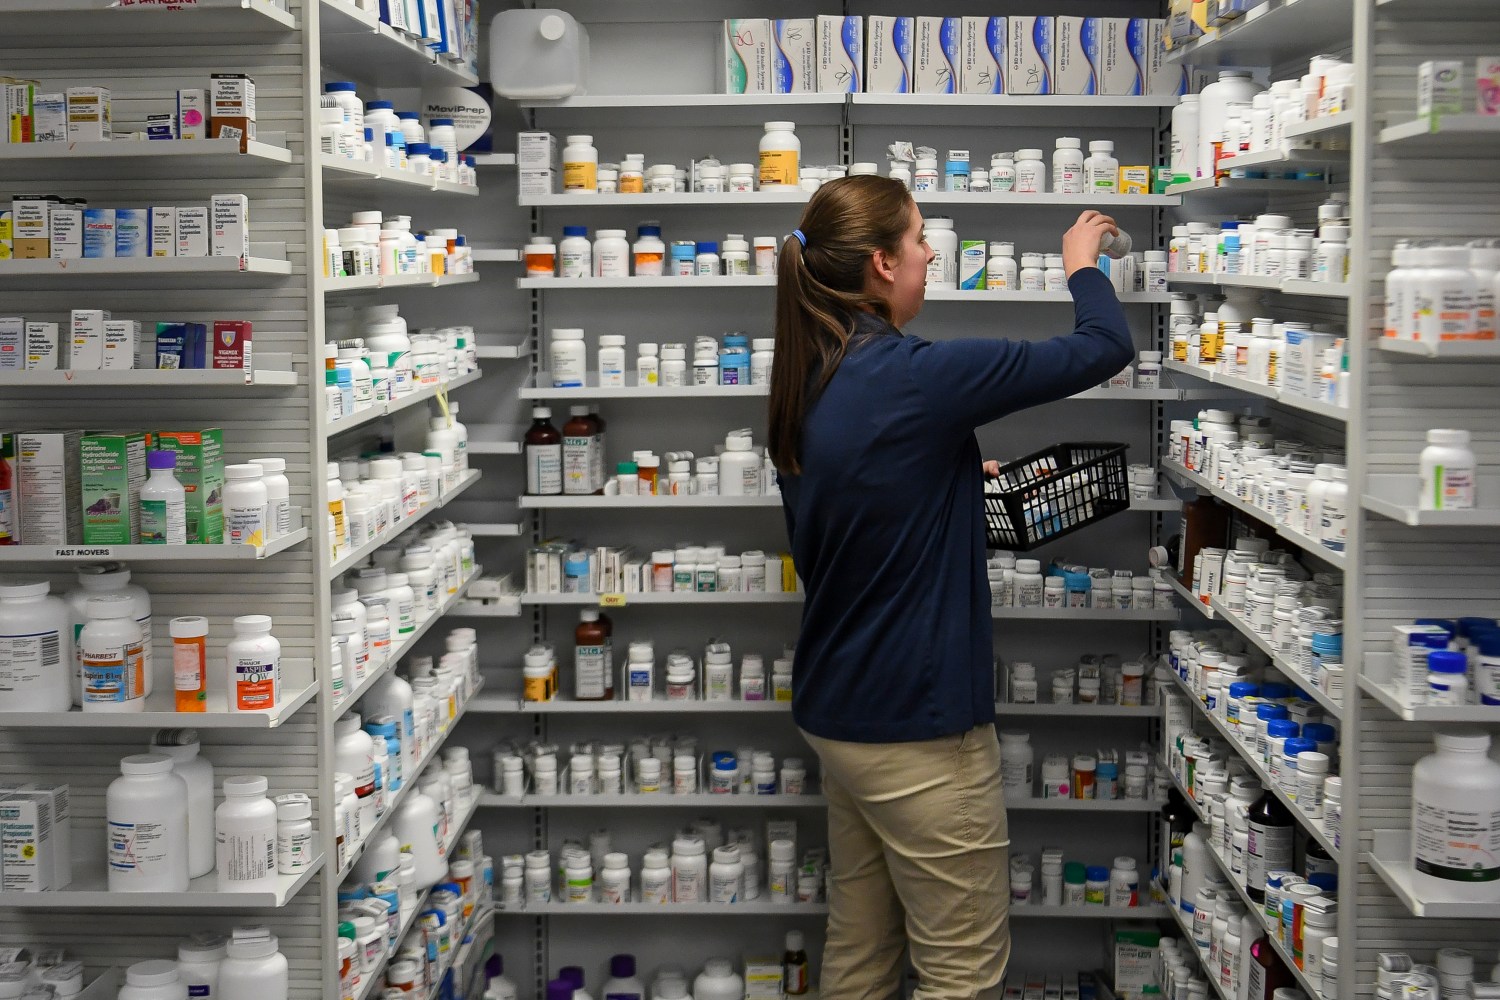 A technician stocks the shelves of the pharmacy at White House Clinic in Berea, Kentucky, U.S., February 7, 2018. Picture taken February 7, 2018. REUTERS/Bryan Woolston - RC19281A85B0